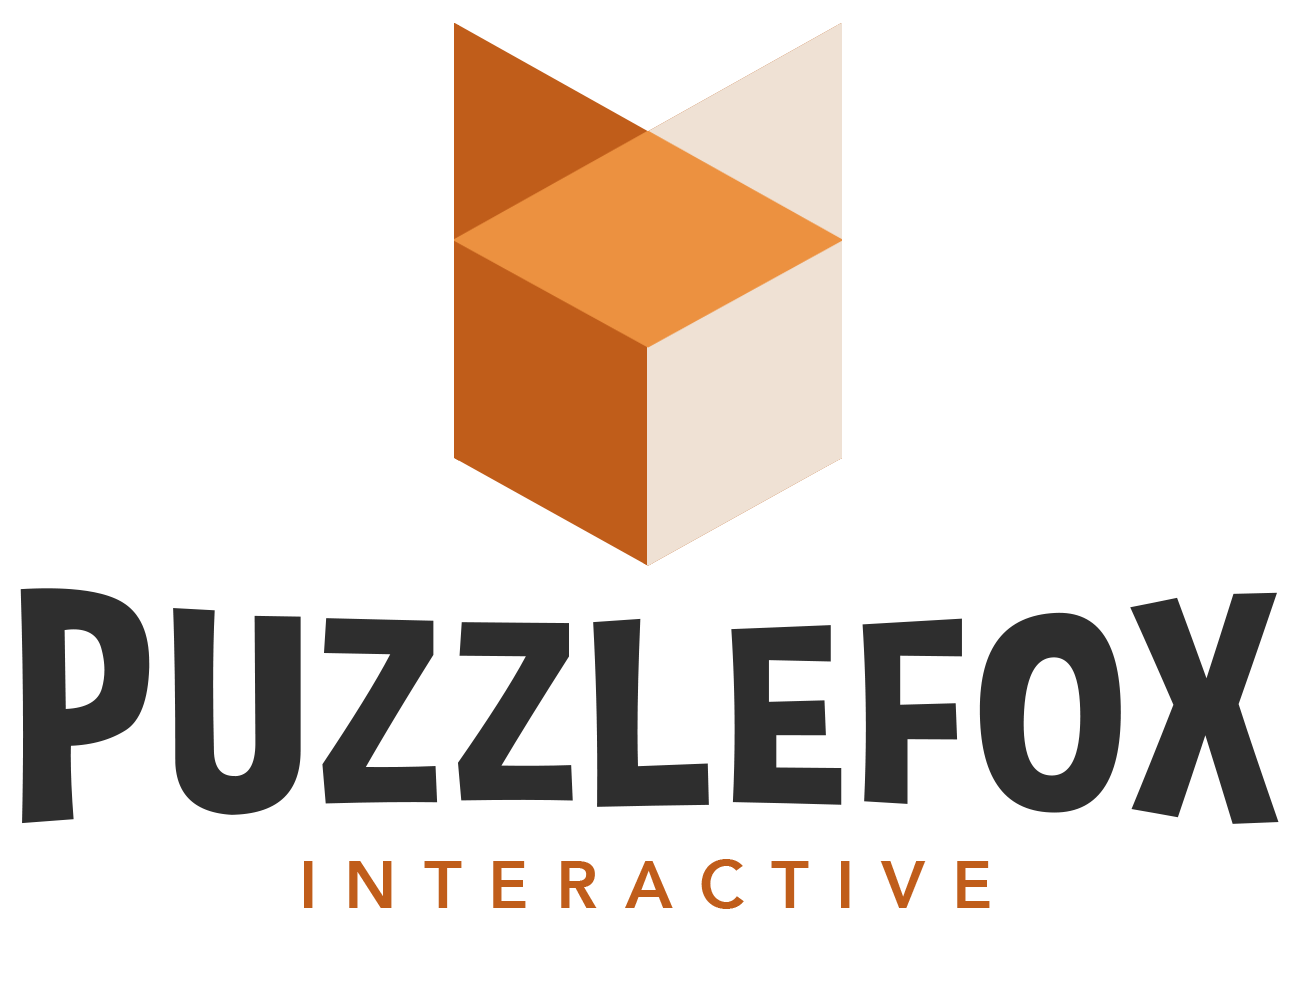 puzzlefoxlogowithtext8